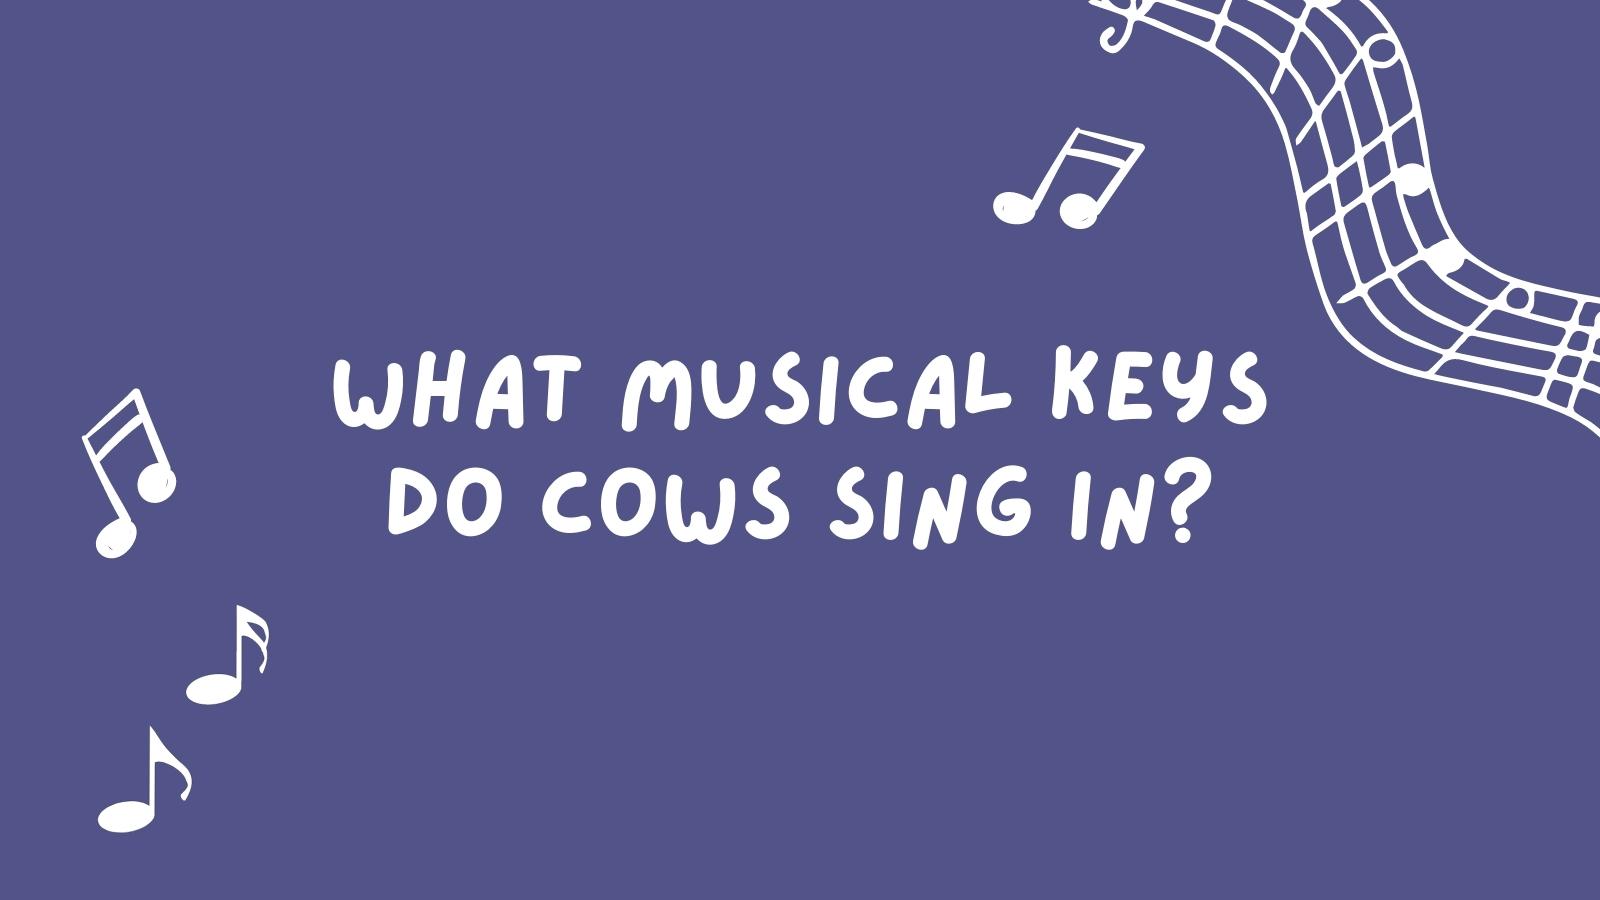 All Singing, All Dancing, Cats the Musical — Inside Out Style